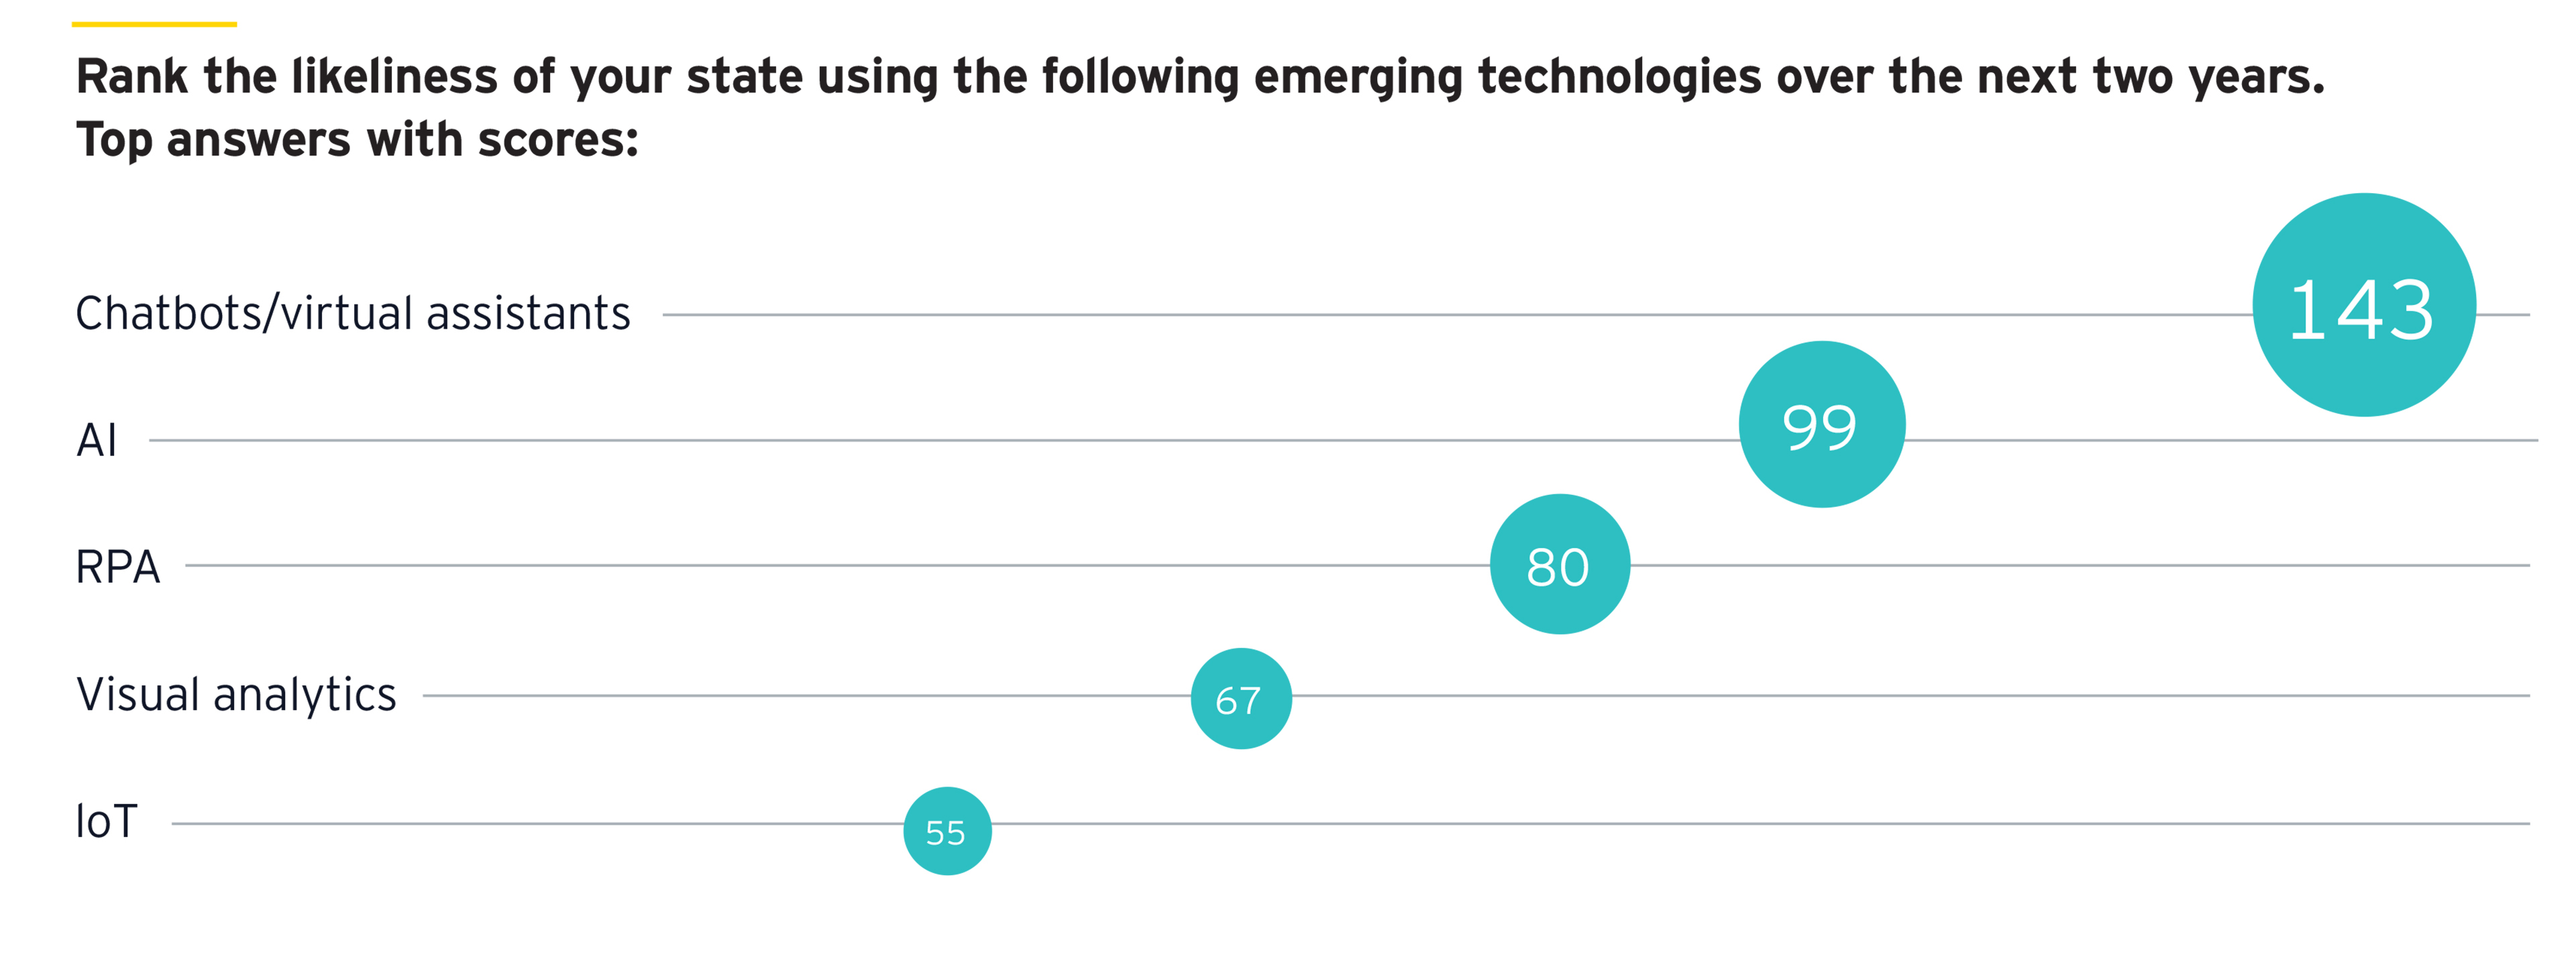 State emerging technologies